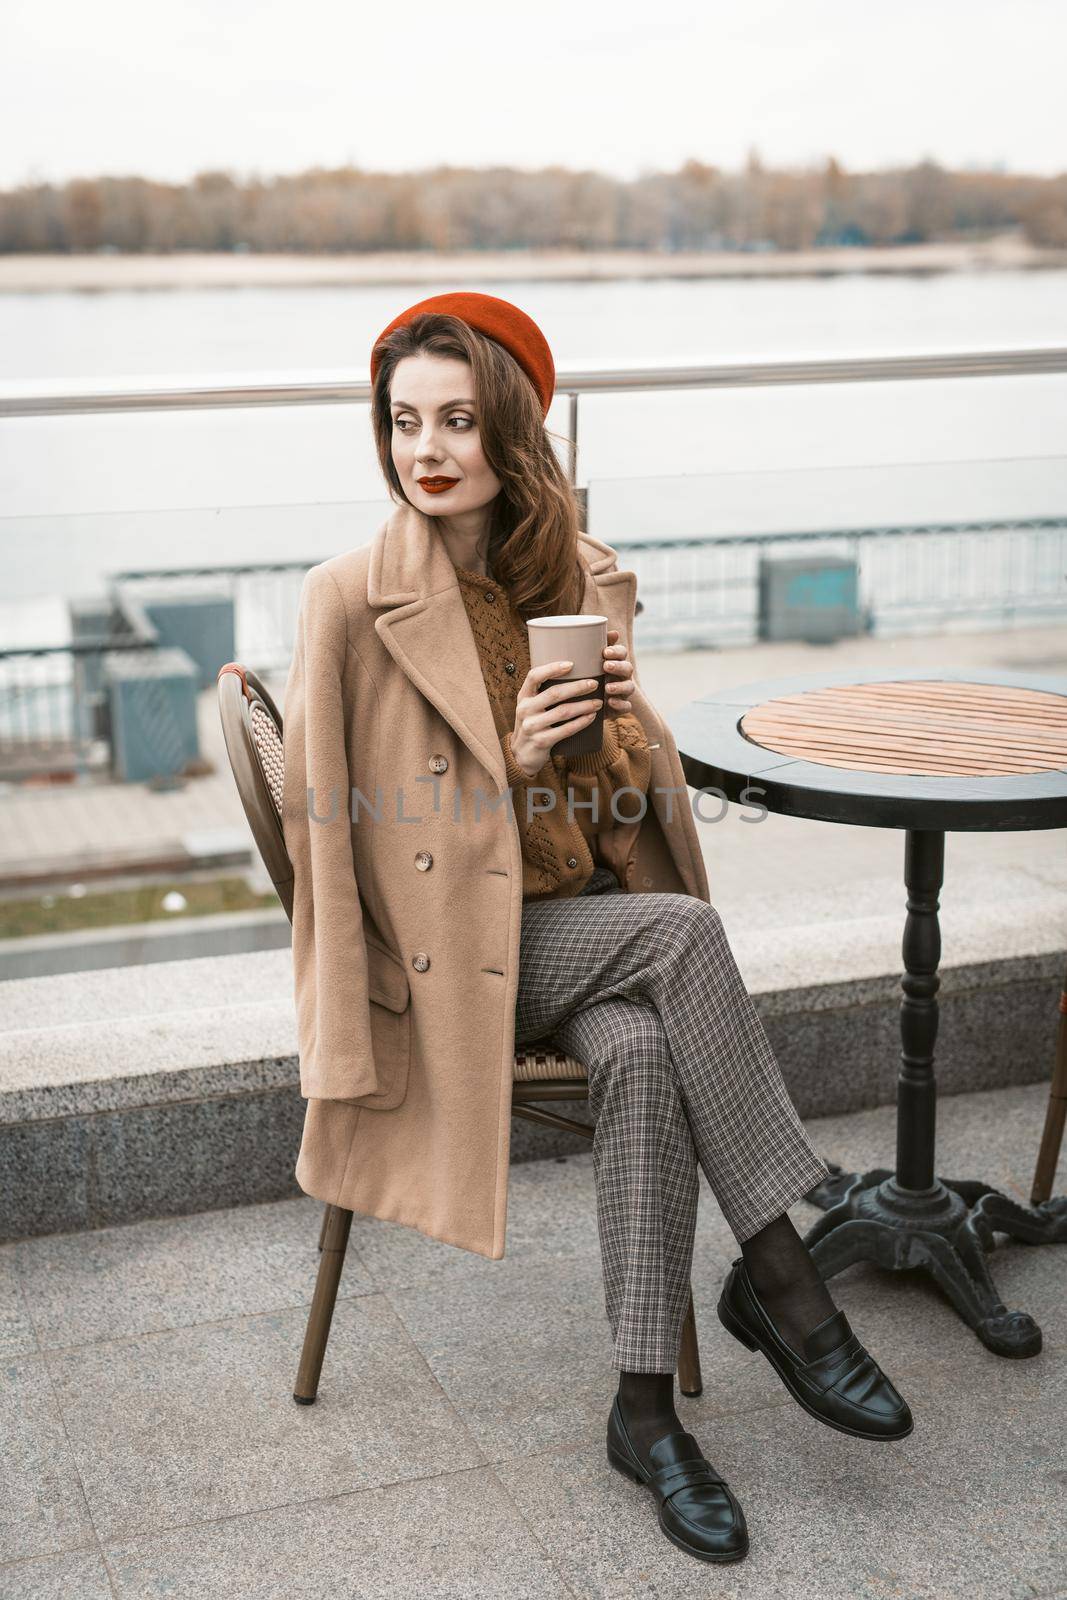 Charming young woman having a coffee sitting at empty restaurant terrace holding a coffee mug, wearing red beret. Autumn urban city on background by LipikStockMedia